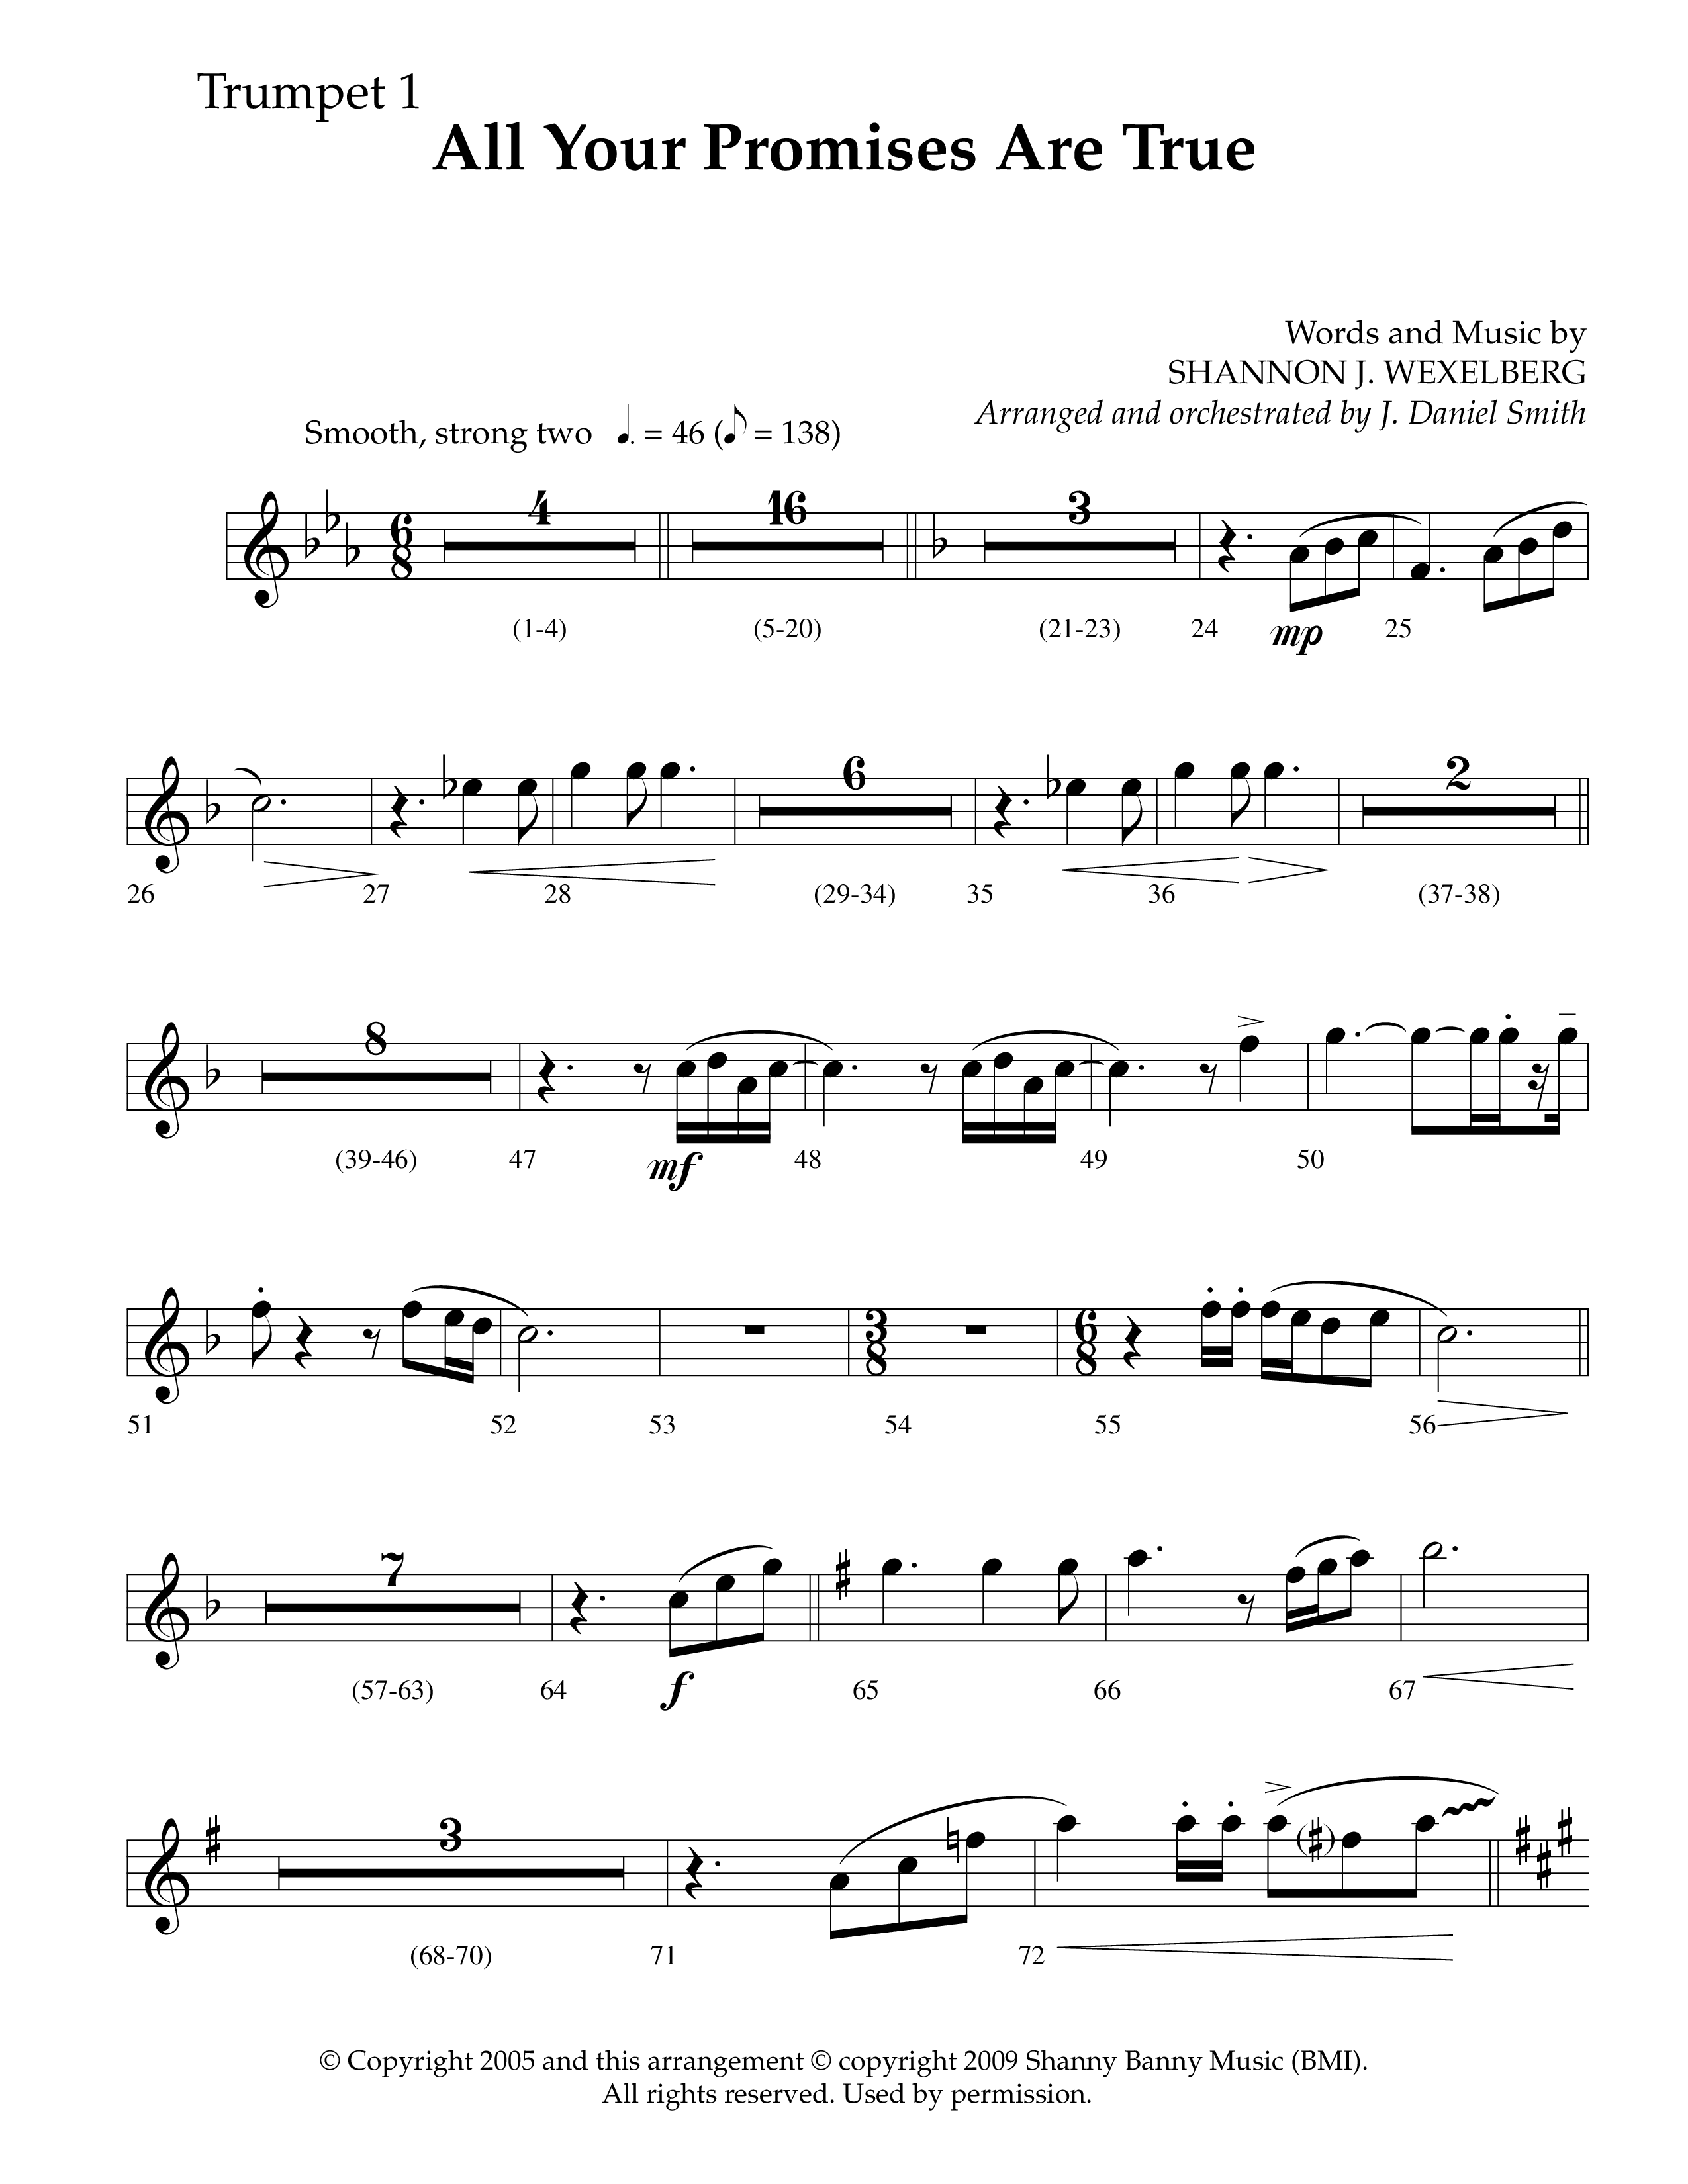 All Your Promises Are True (Choral Anthem SATB) Trumpet 1 (Lifeway Choral / Arr. J. Daniel Smith)